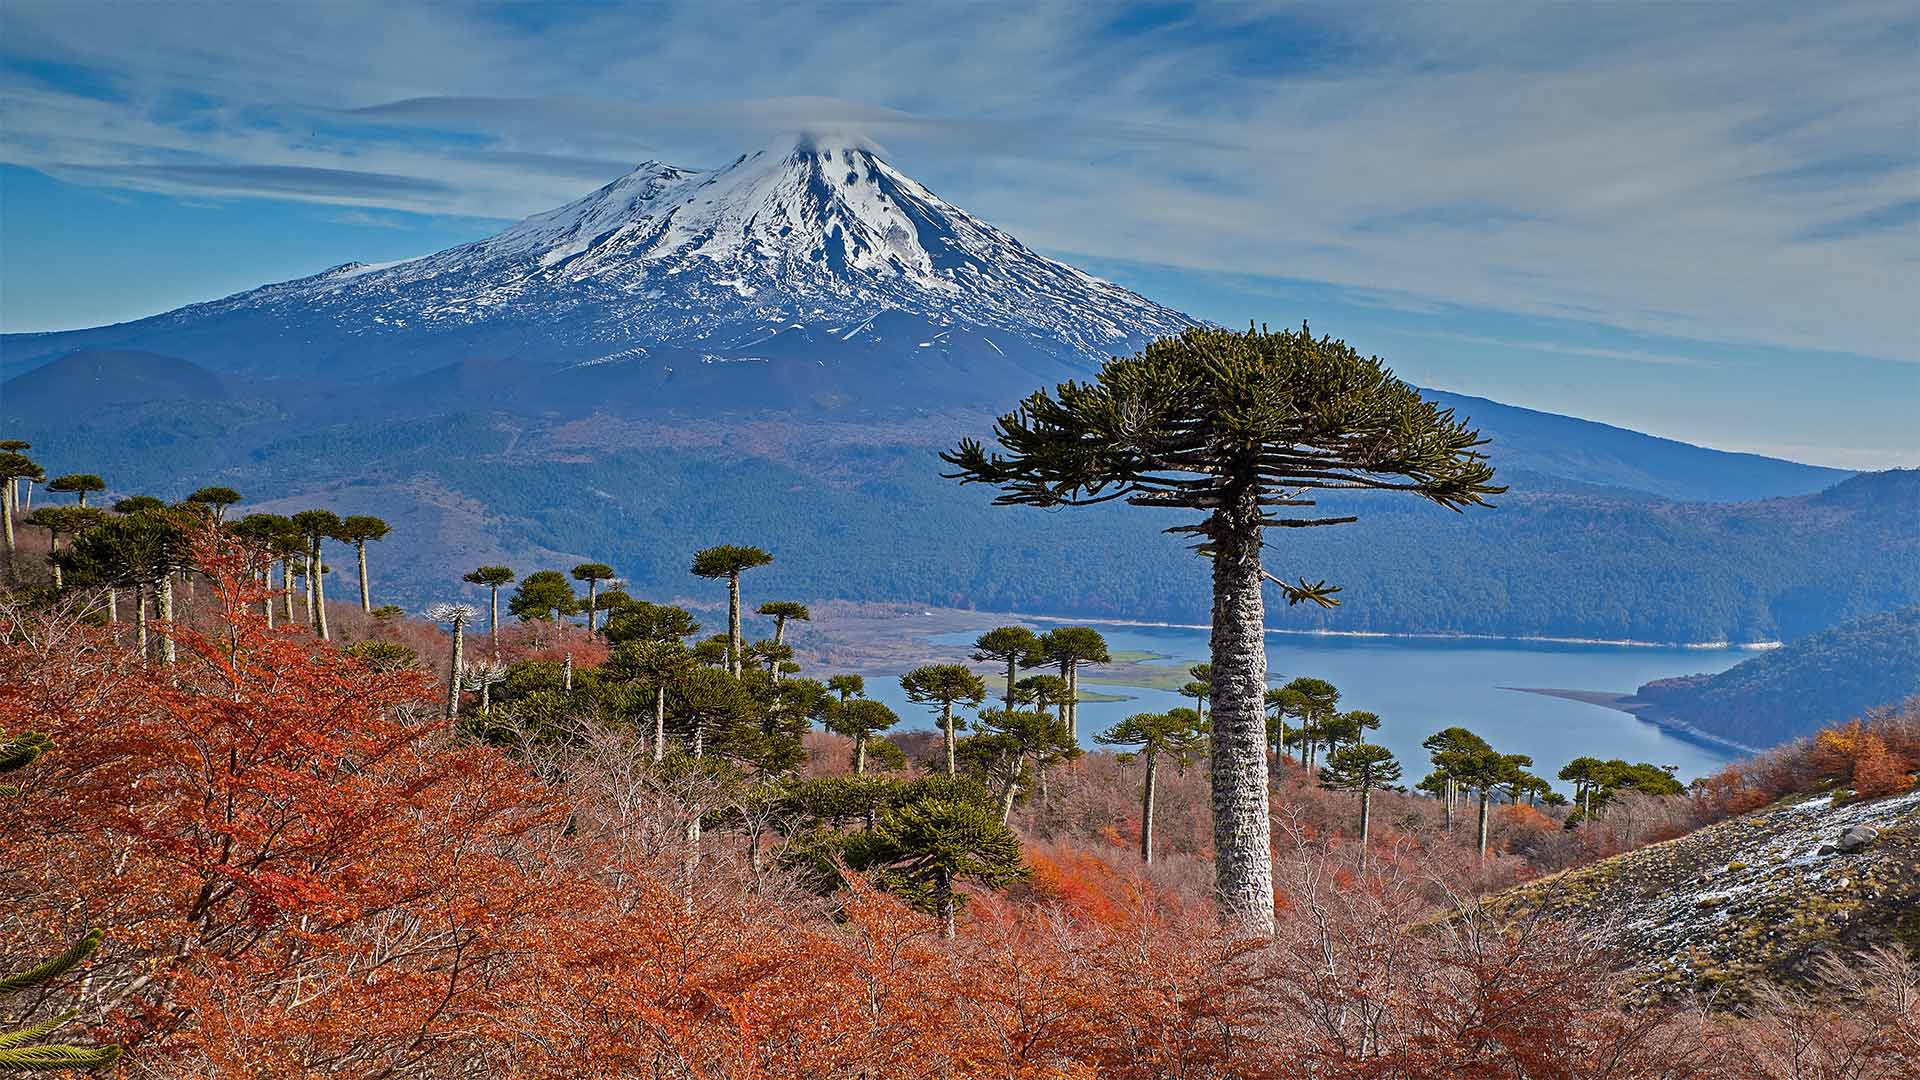 Volcano Llaima with Araucaria trees in the foreground, Conguillío National Park, Chile - Fotografías Jorge León Cabello/Getty Images)